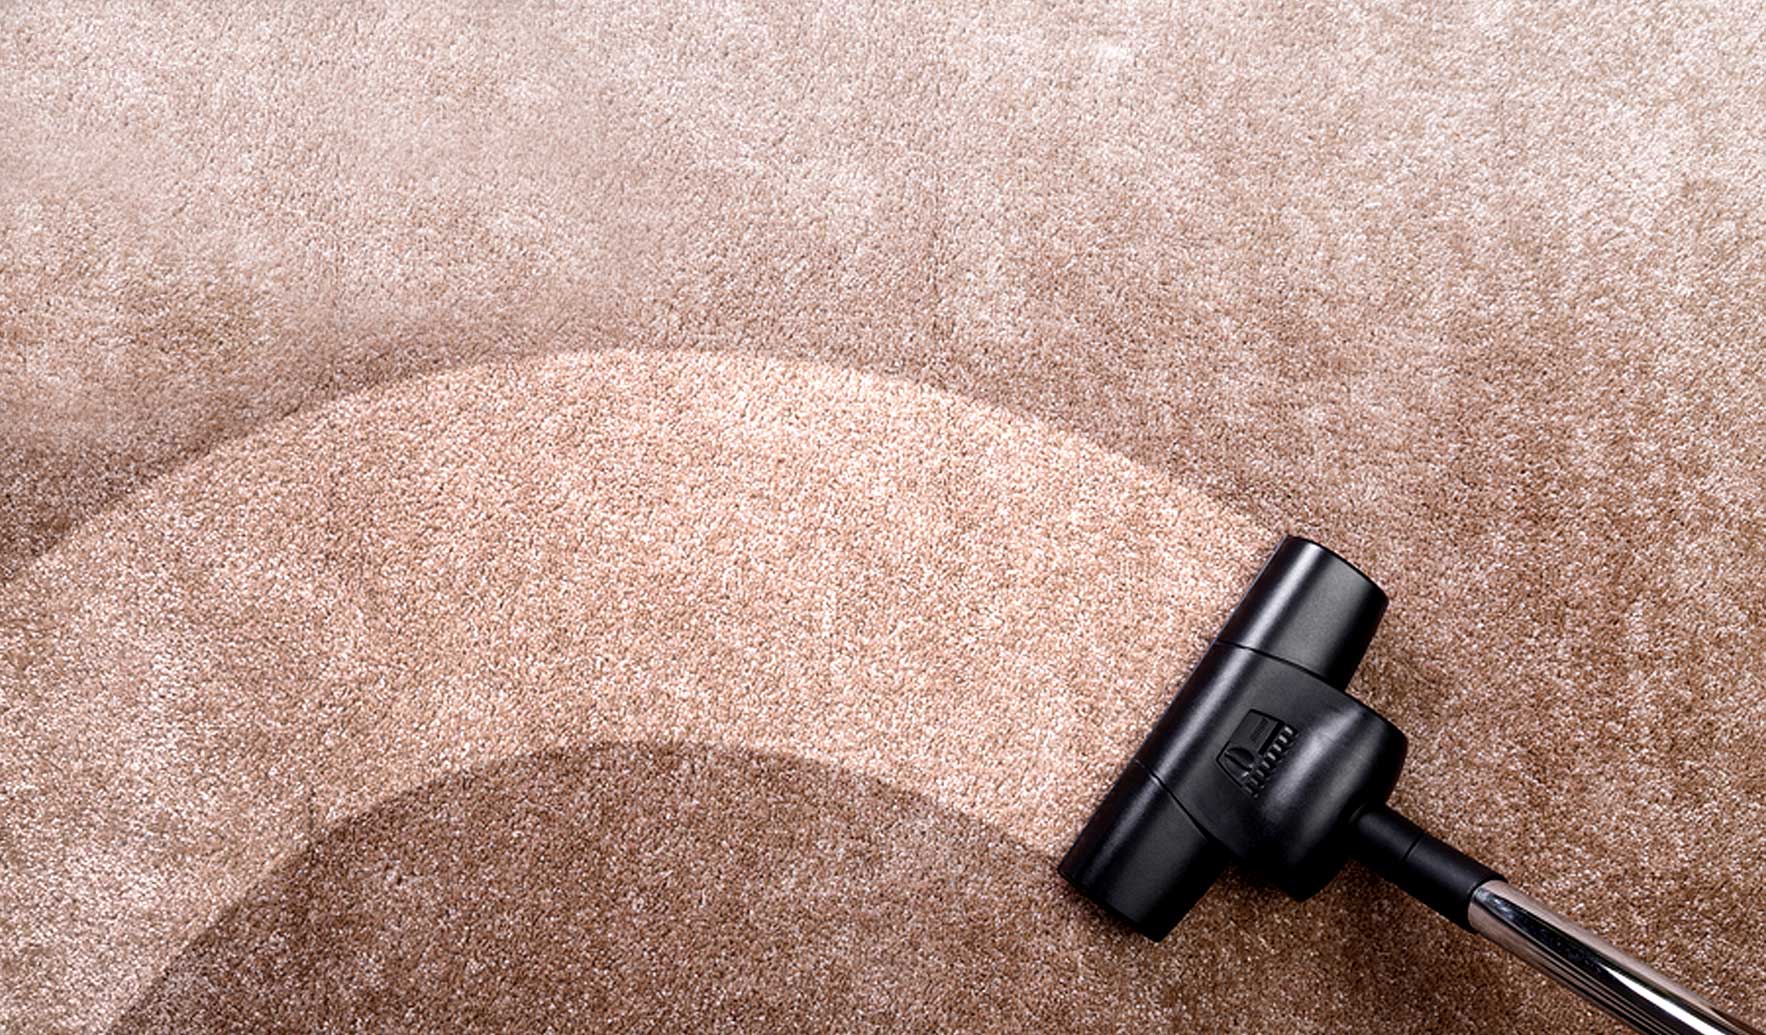 Professional Carpet Cleaning